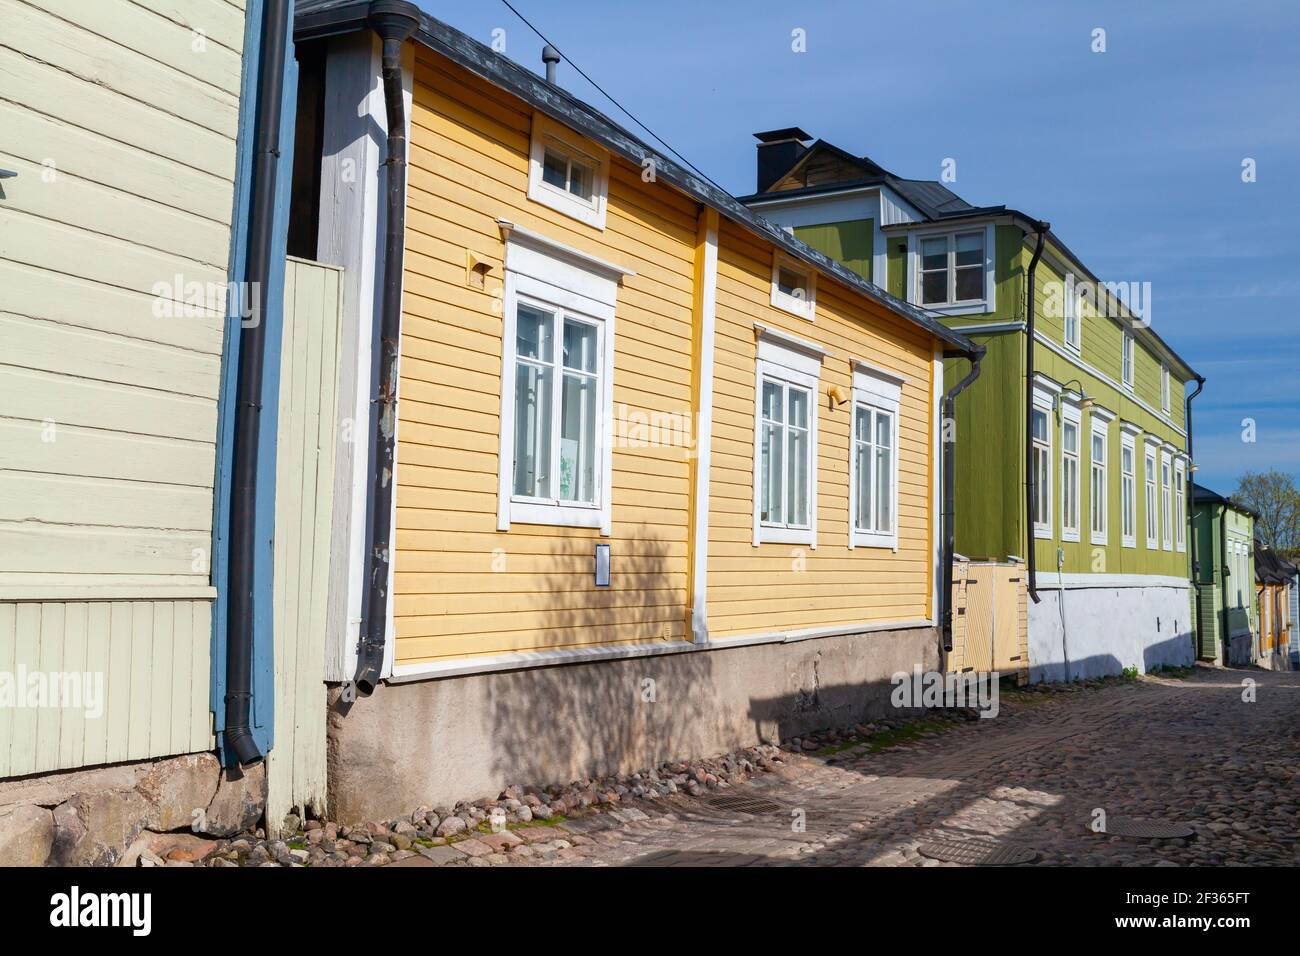 Street view with colorful Finnish wooden houses, old town of Porvoo, Finland Stock Photo